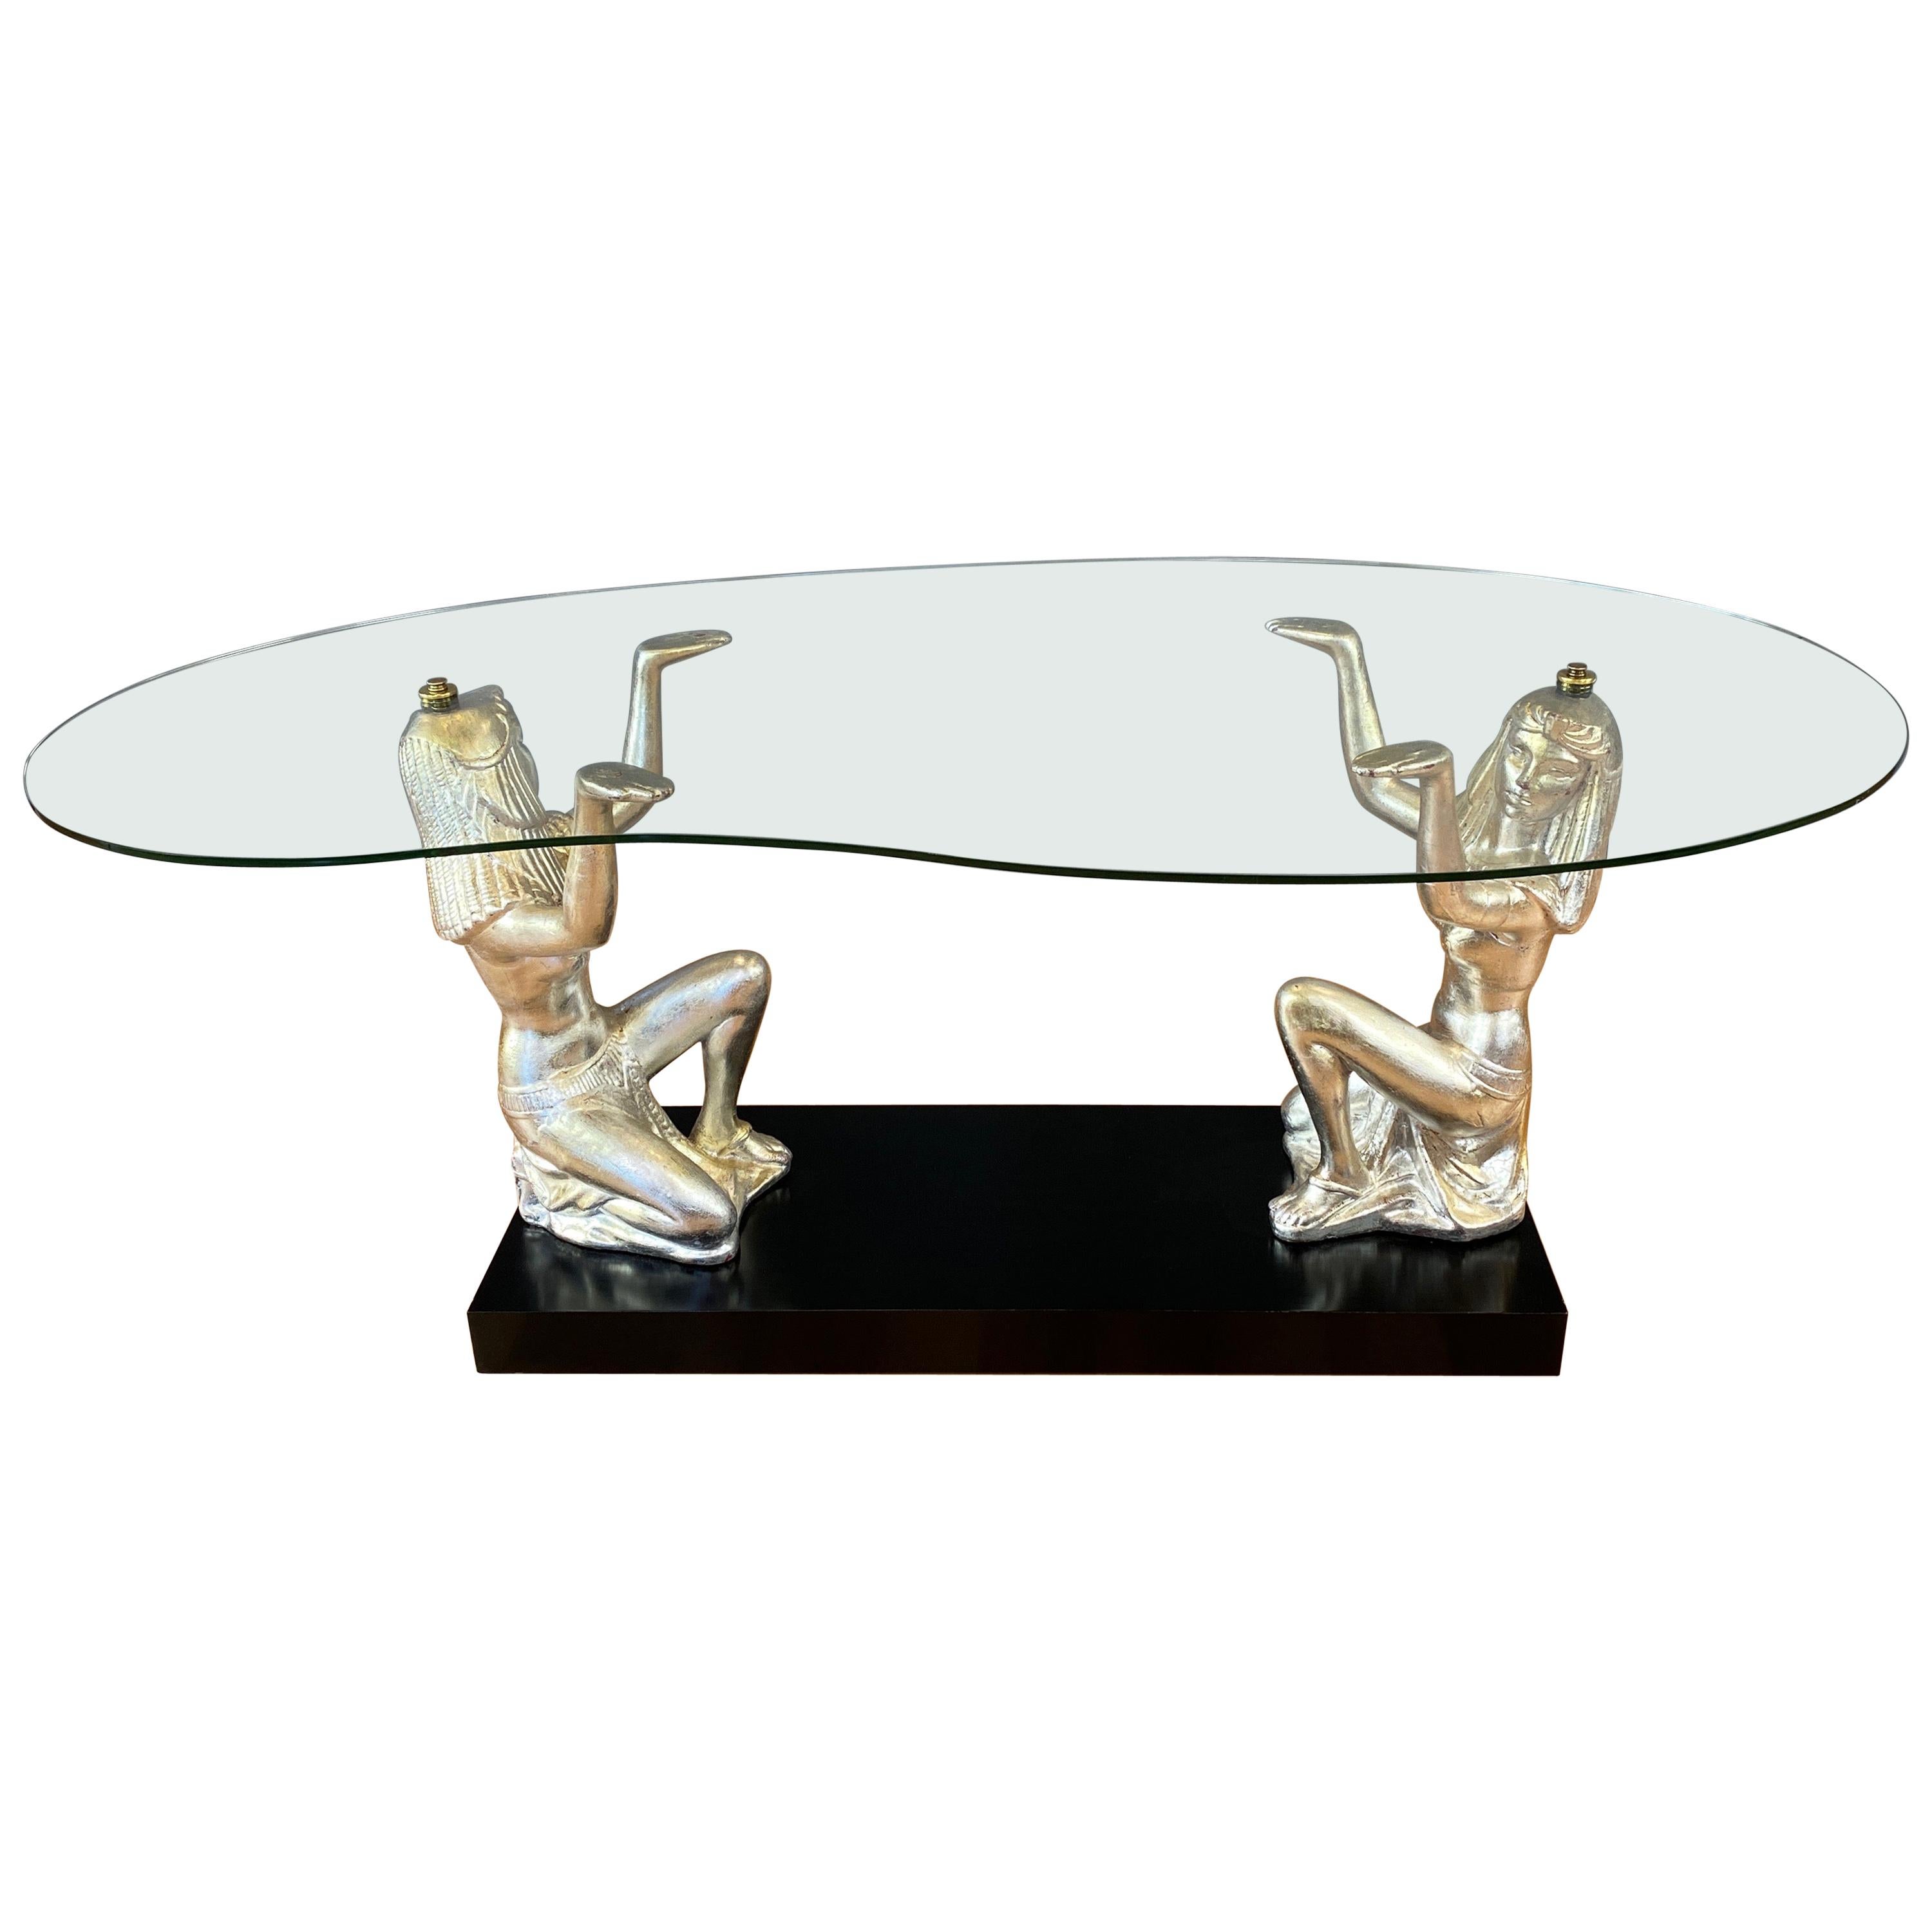 California Lamps & Shades Co. Silvered Egyptian Figures Glass Coffee Table, 1951 For Sale